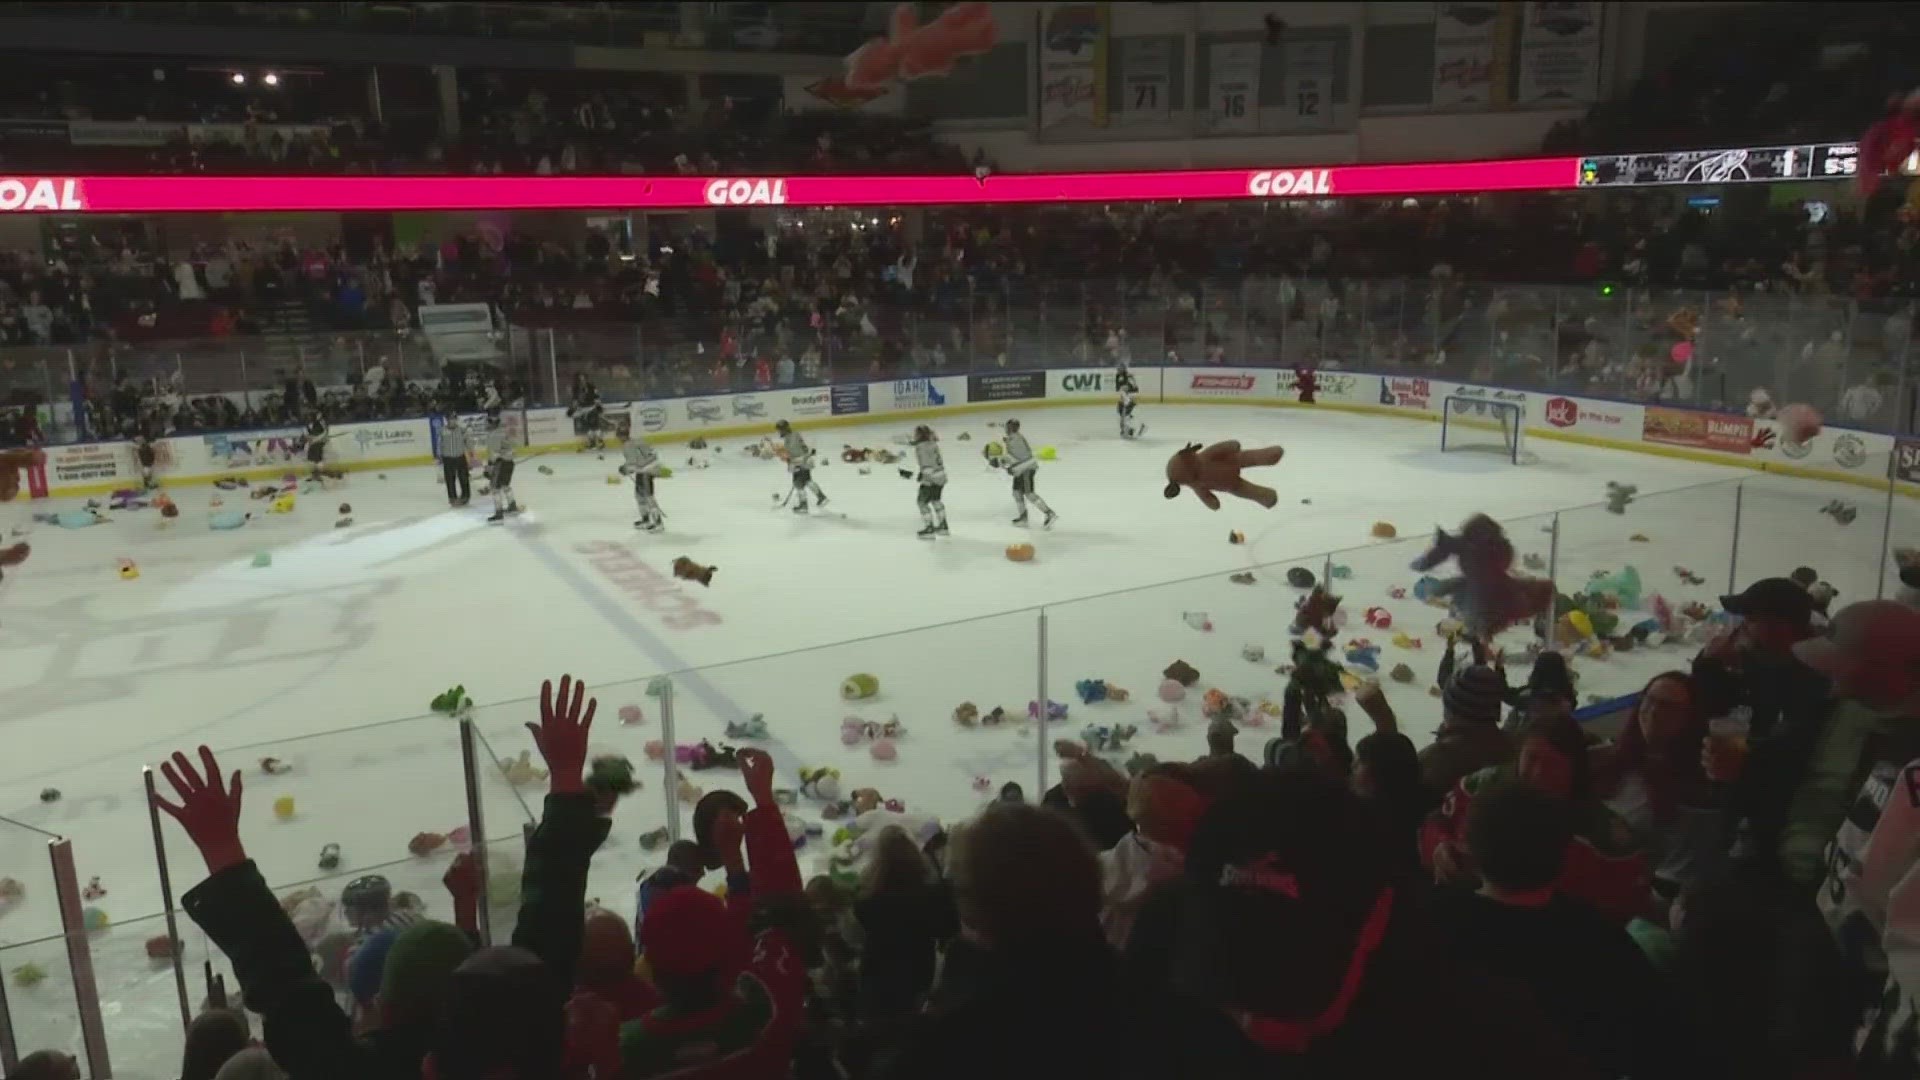 All stuffed animals that were thrown onto the ice are donated to the Marine Corps' Toys for Tots program